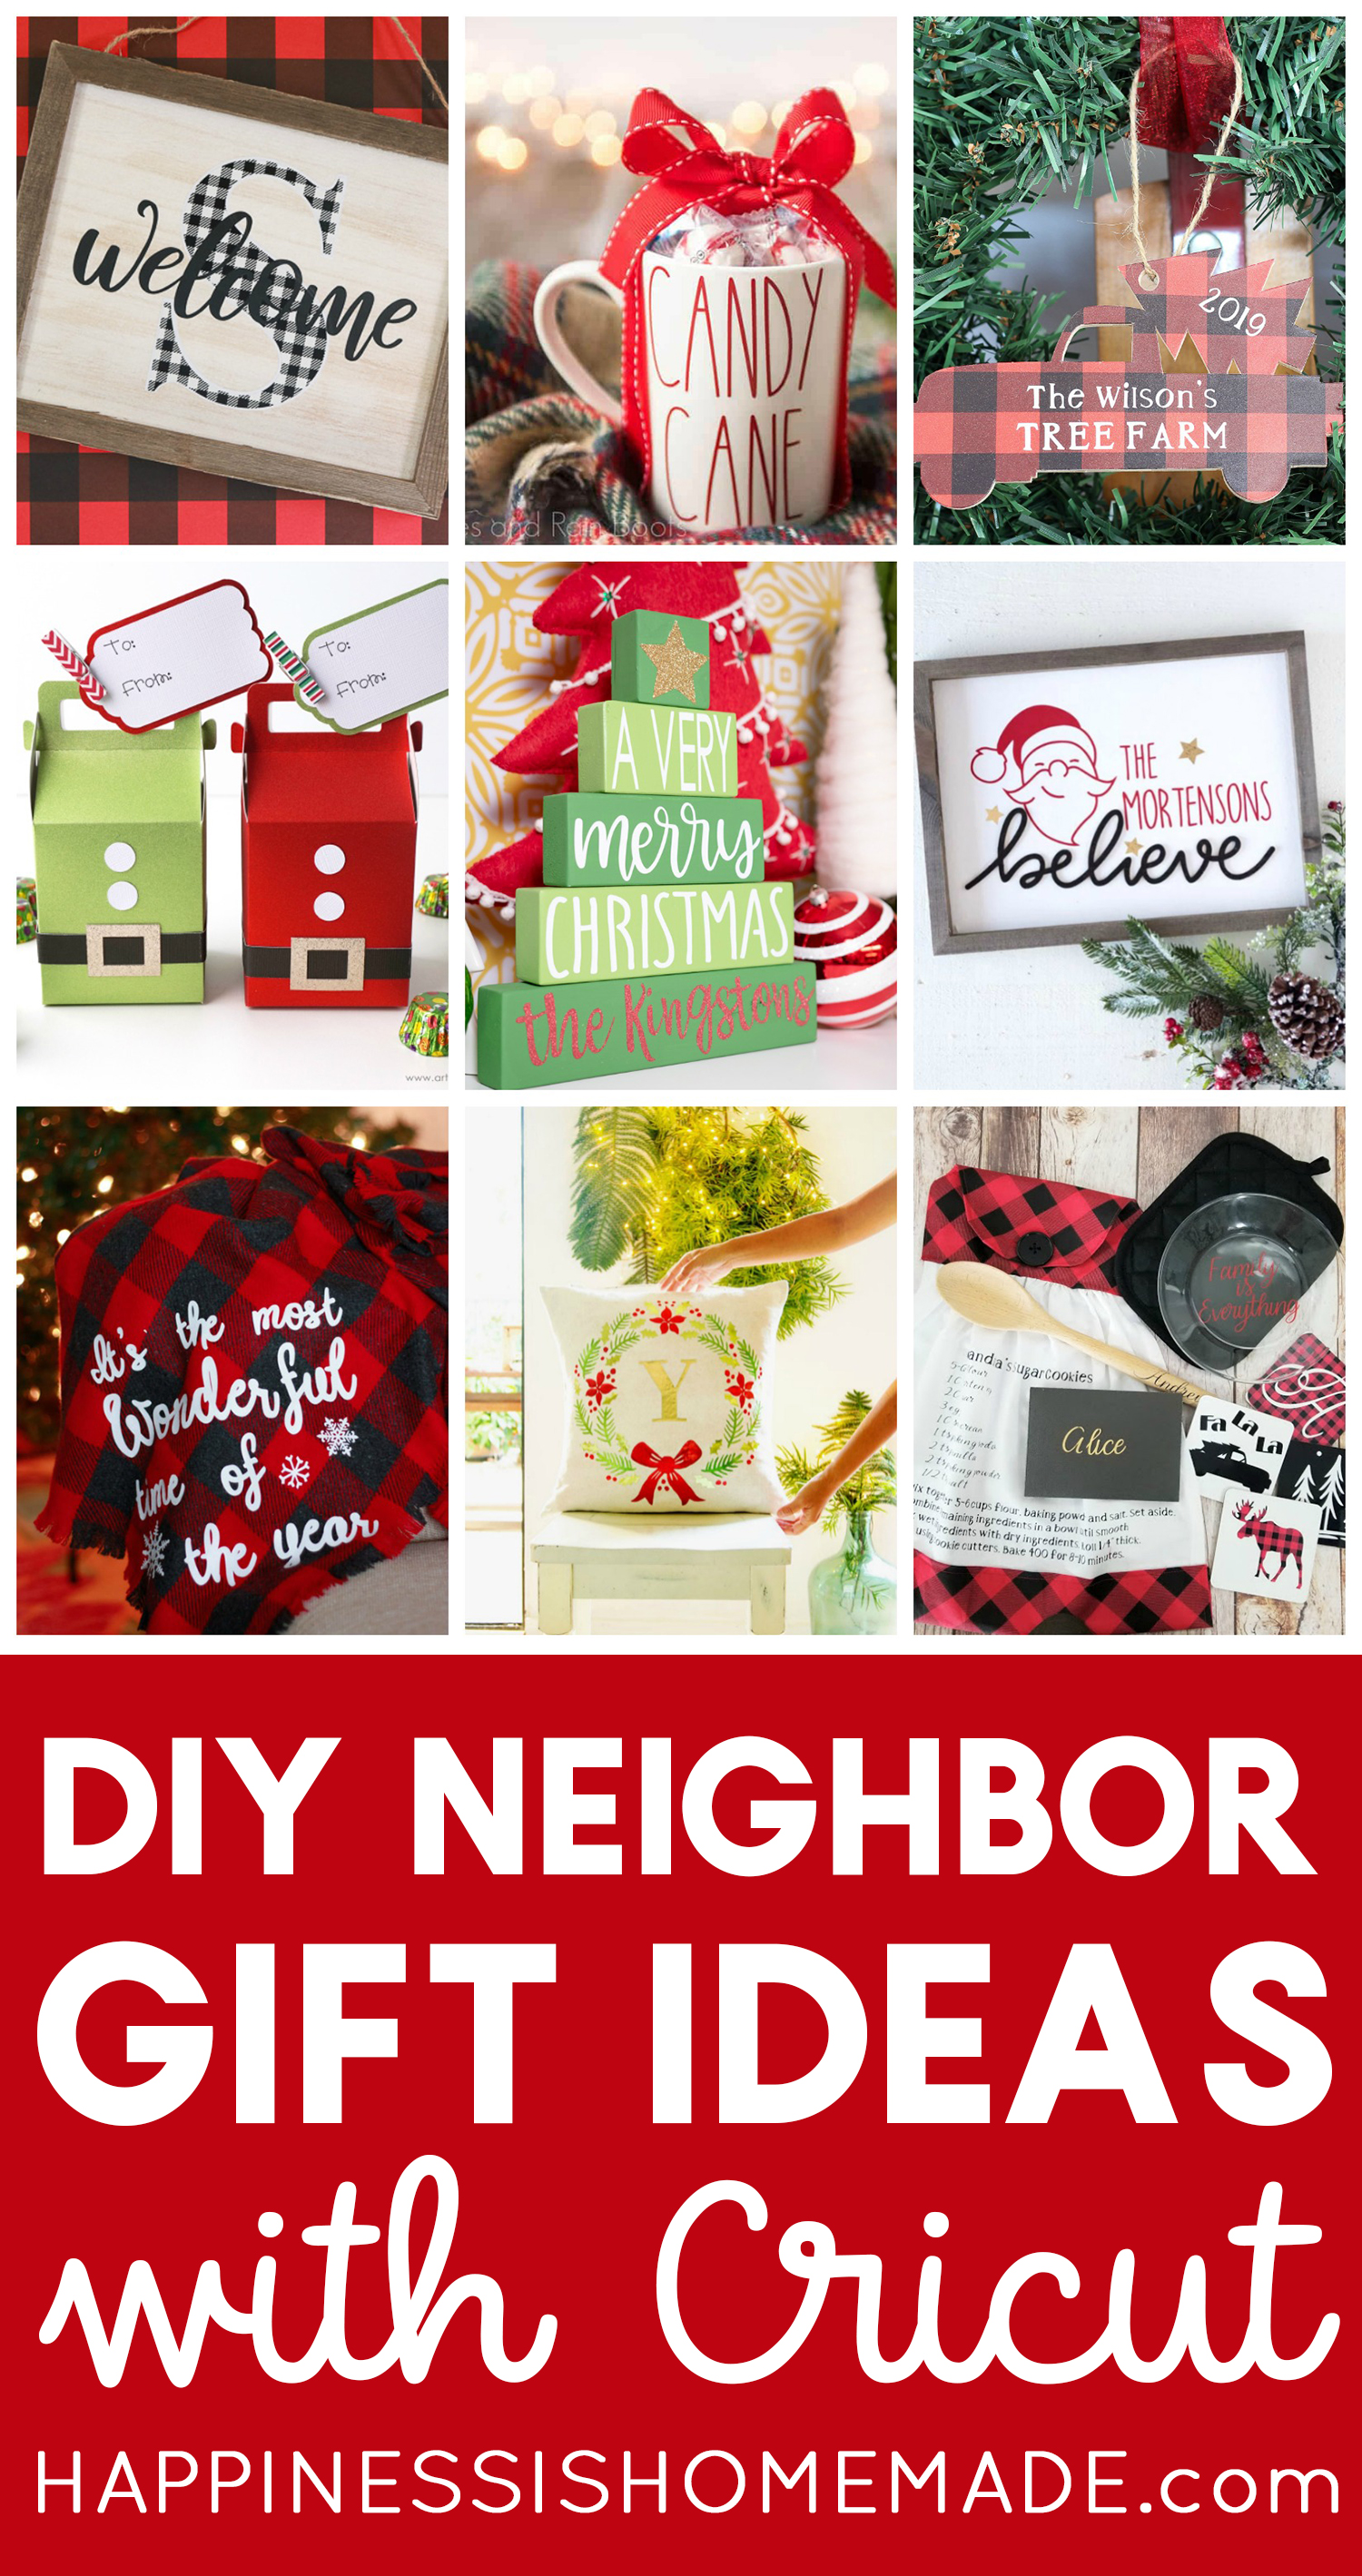 Best Neighbor Gifts for Christmas - 20 Quick & Easy Ideas!